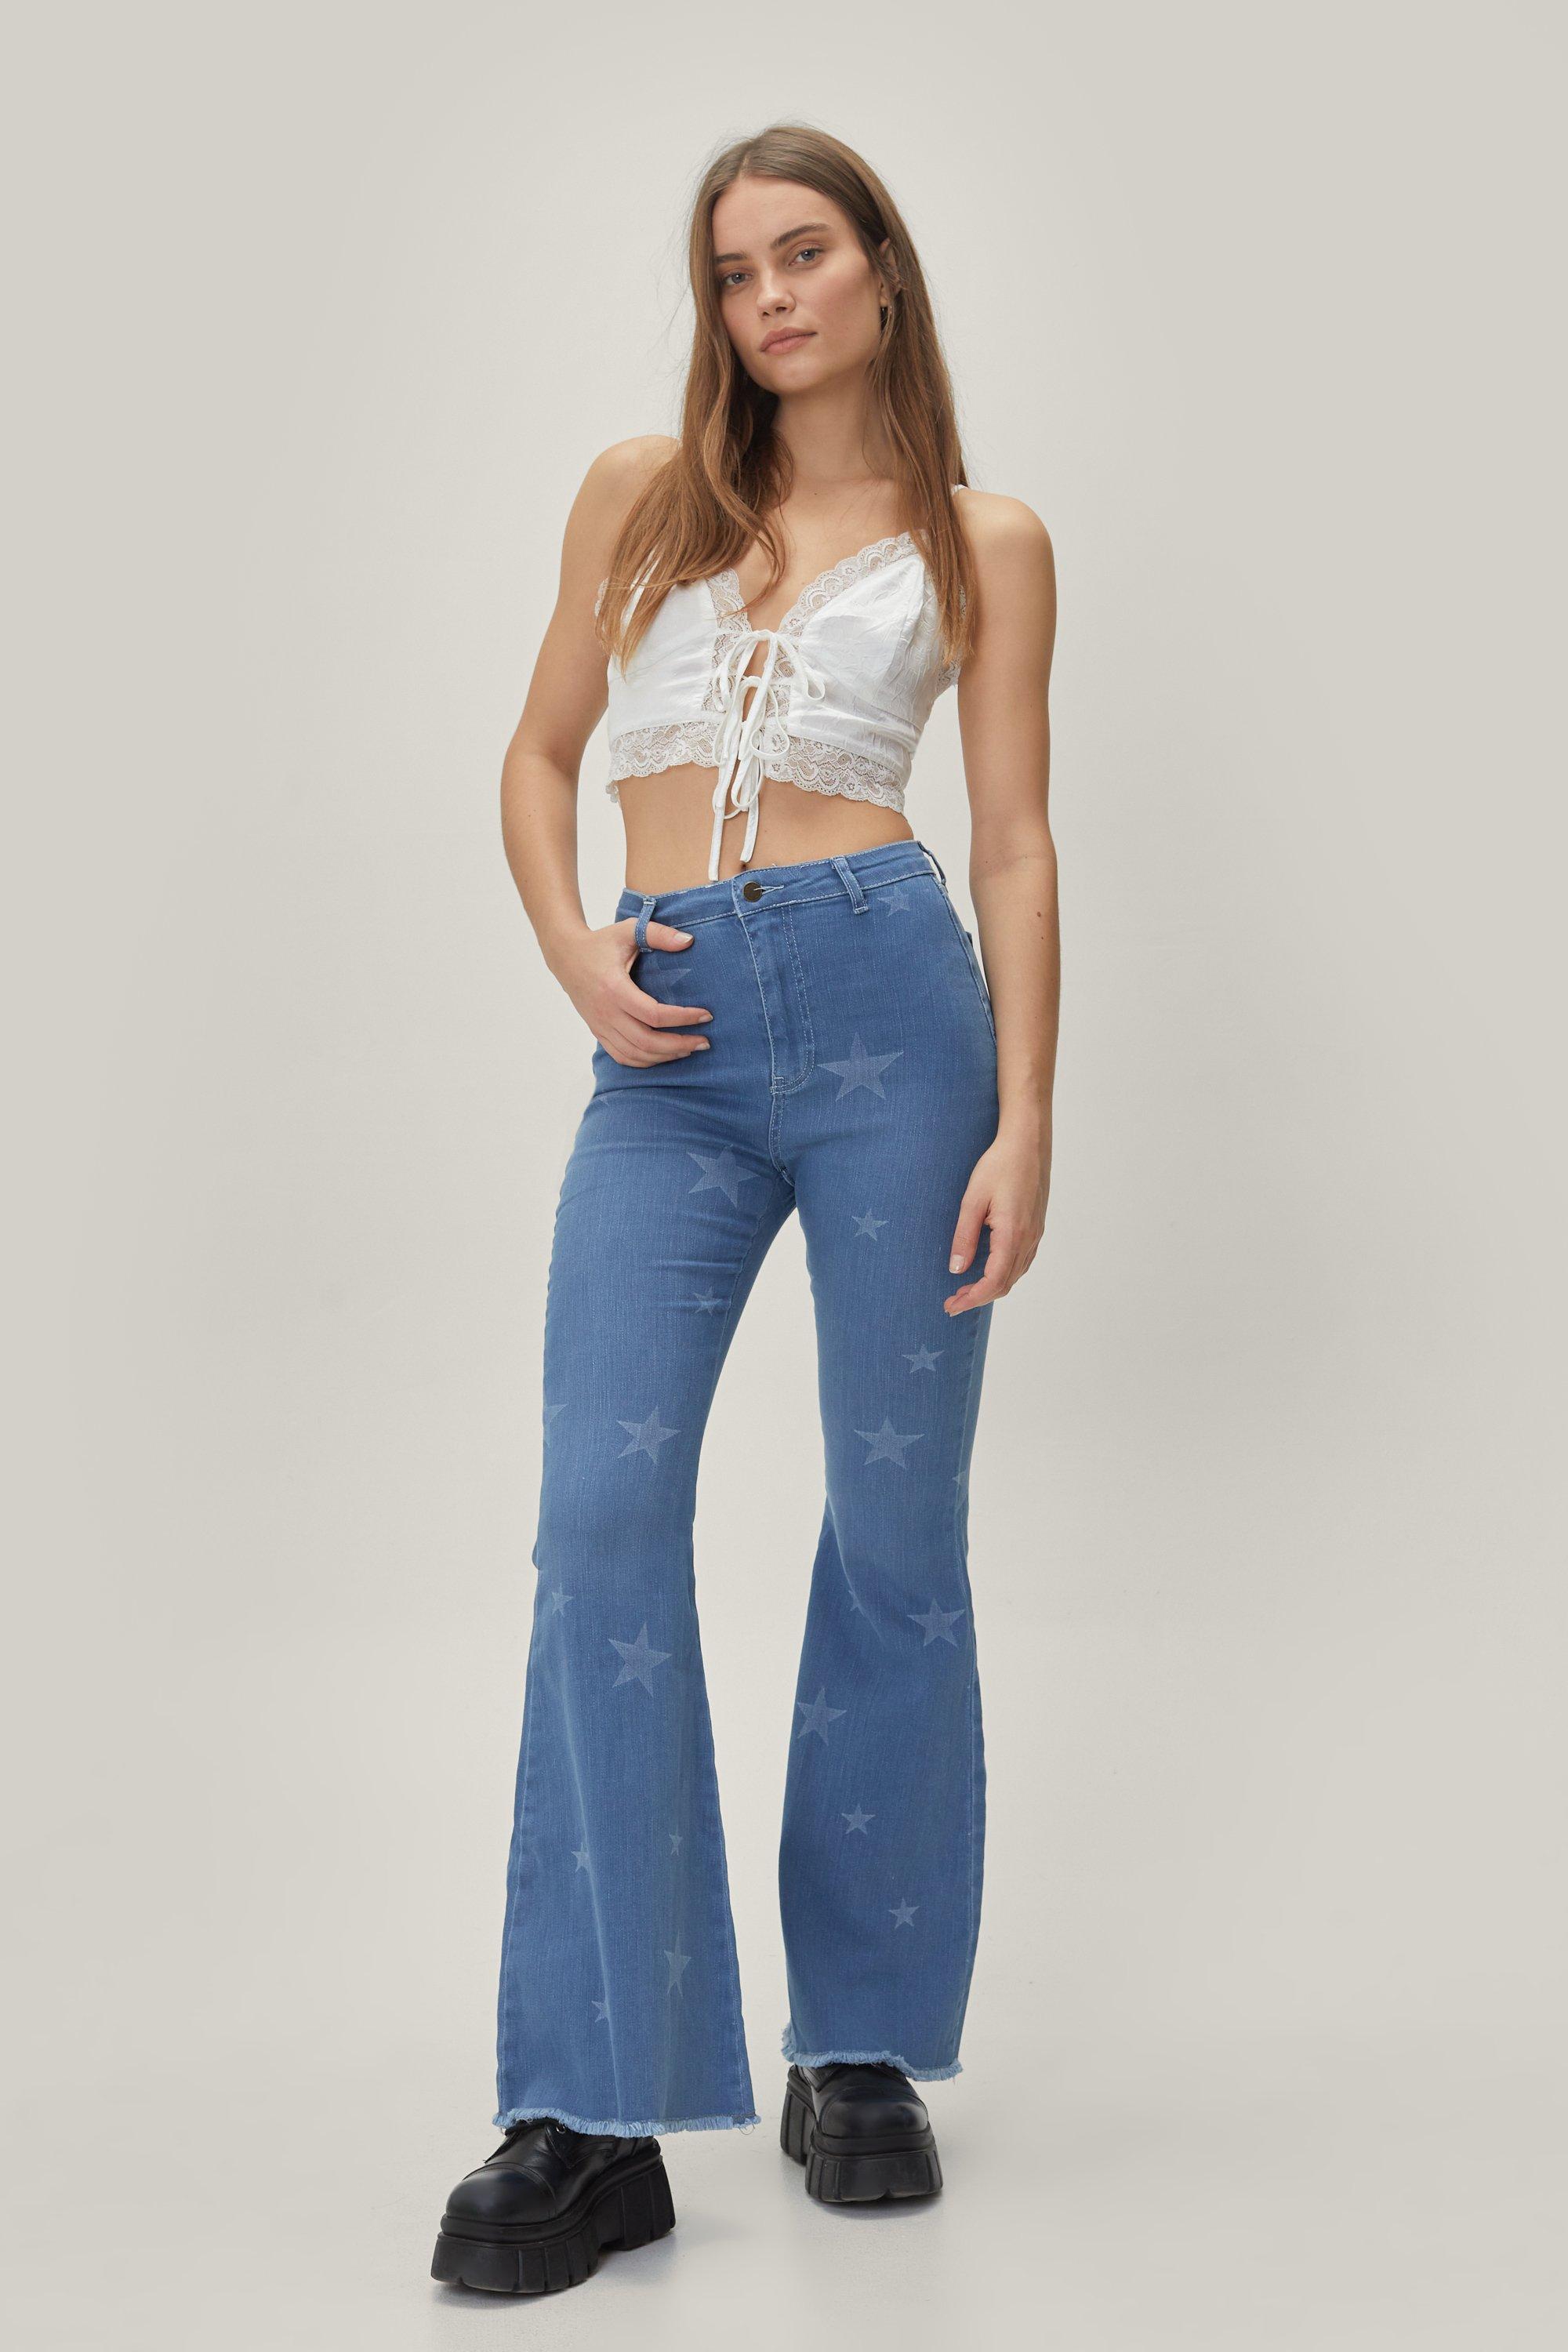 star printed bell bottom jeans